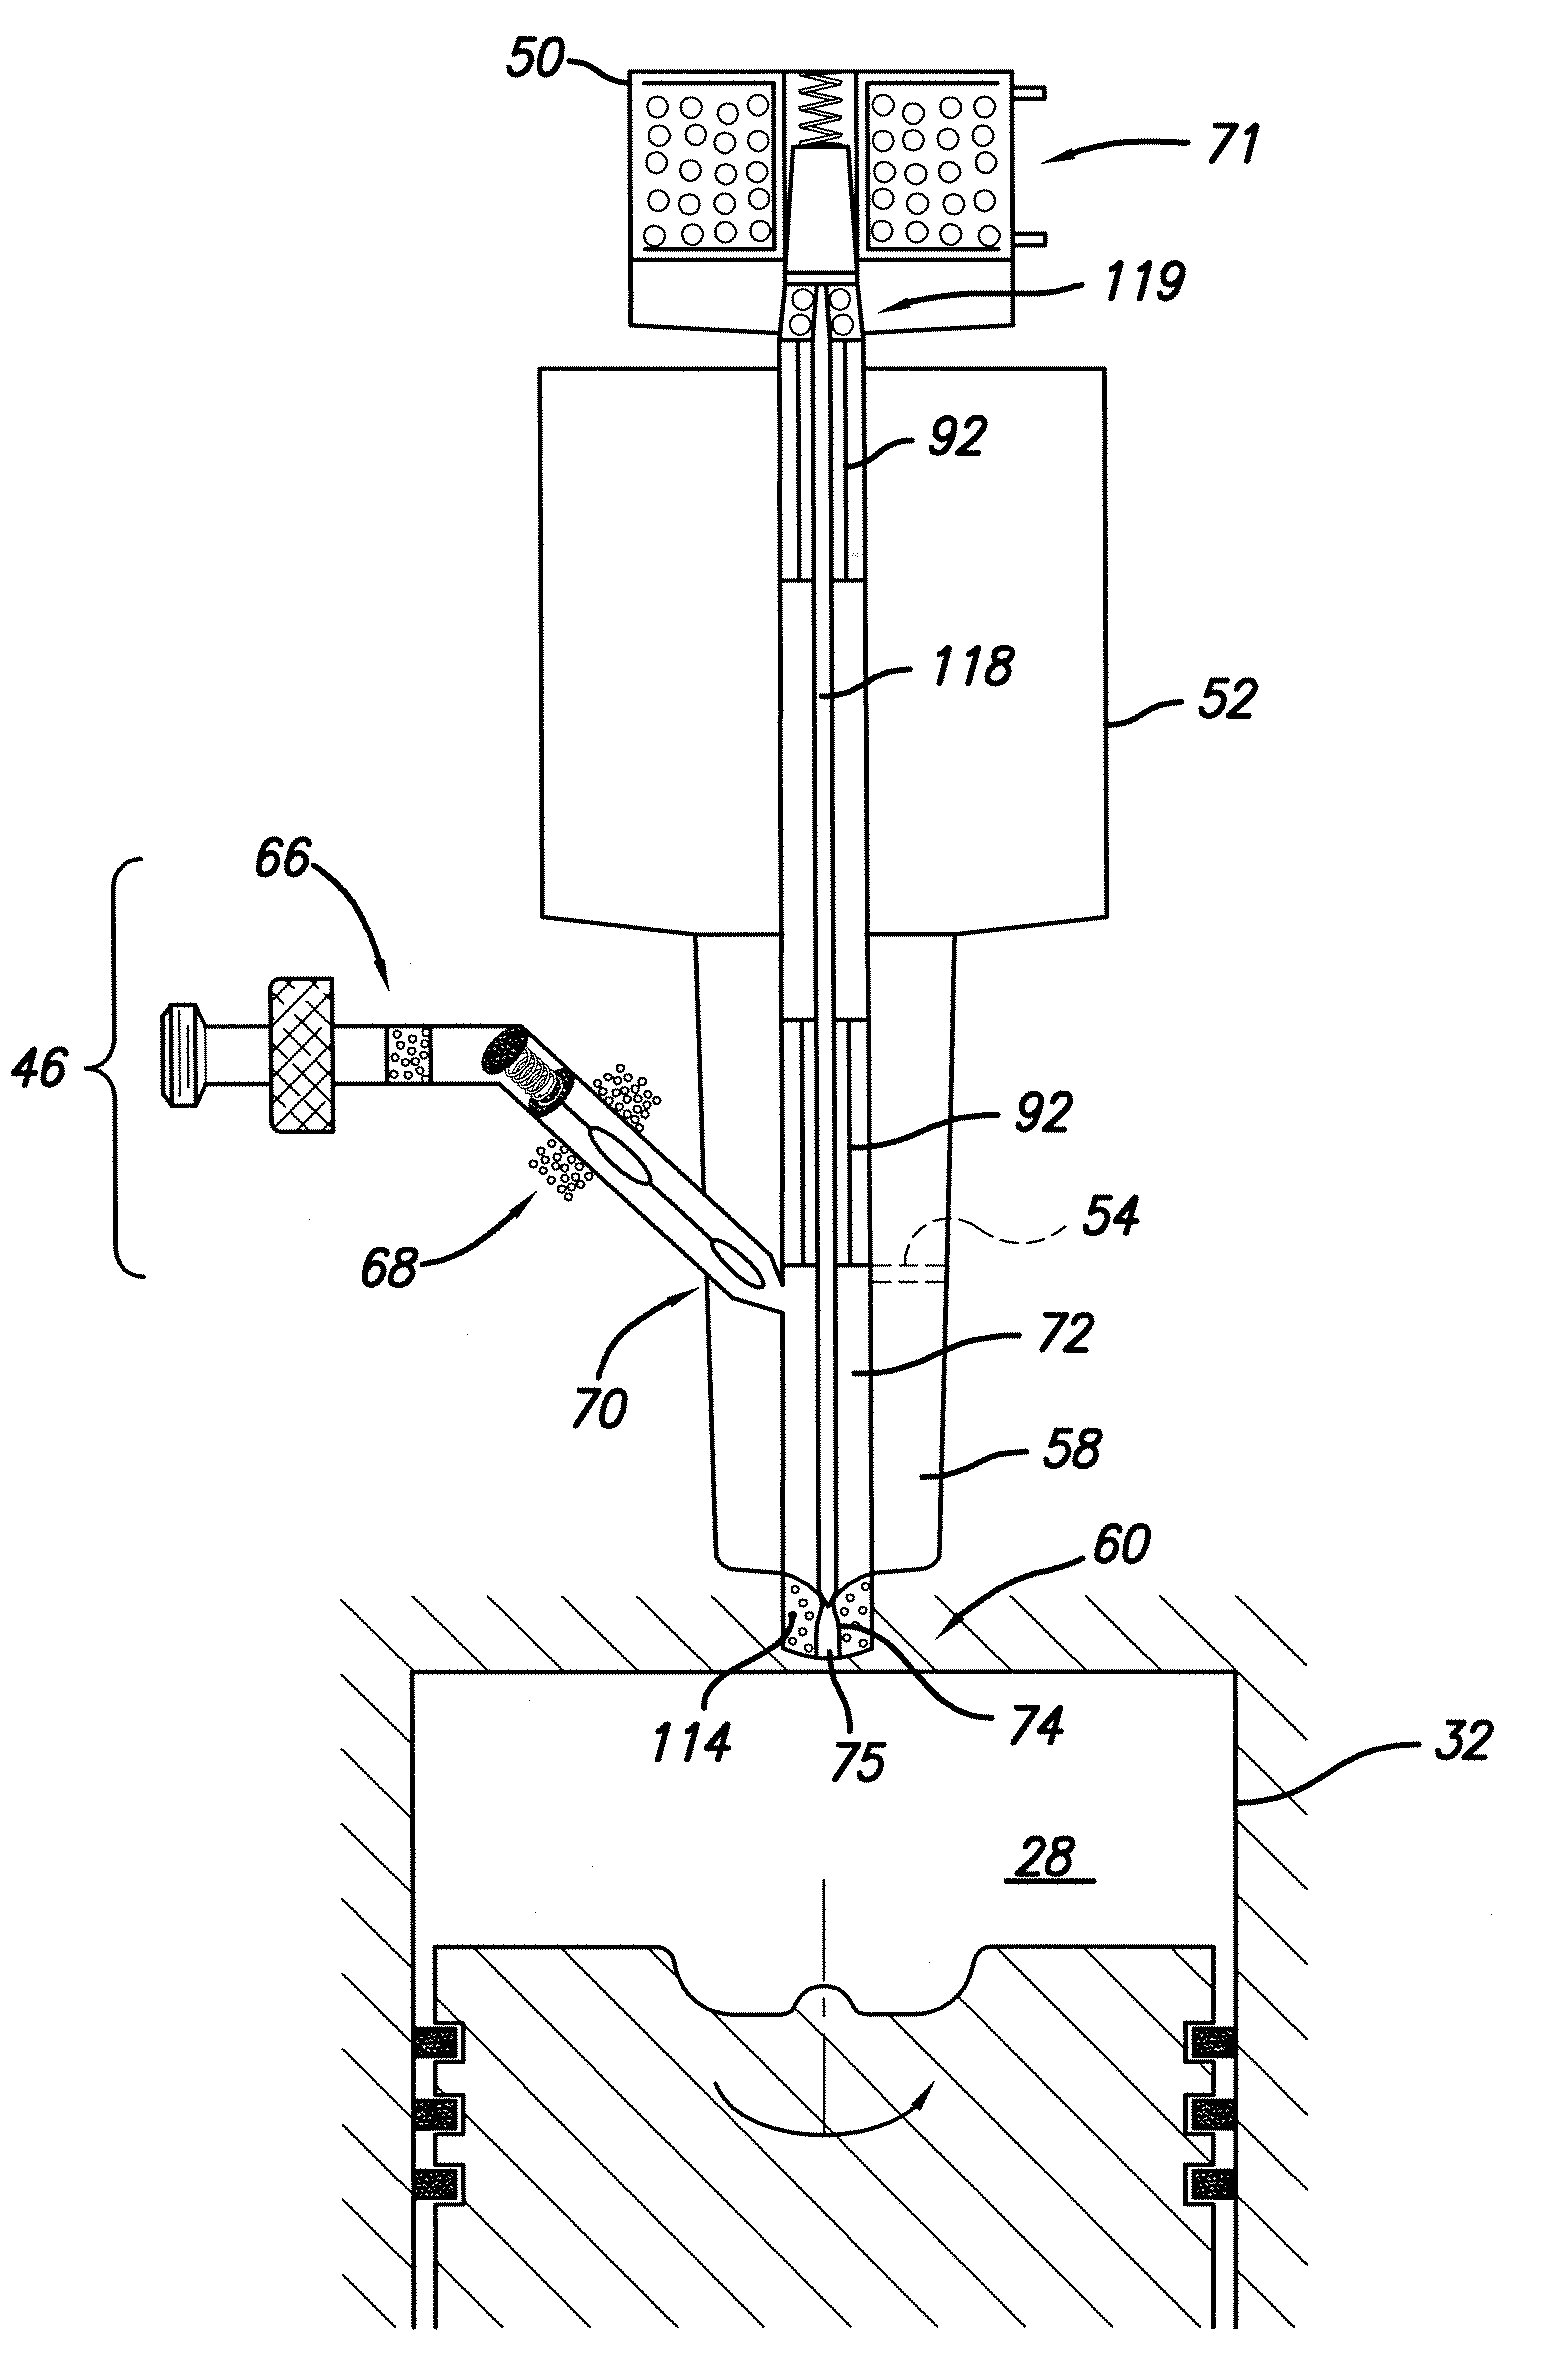 Heated catalyzed fuel injector for injection ignition engines